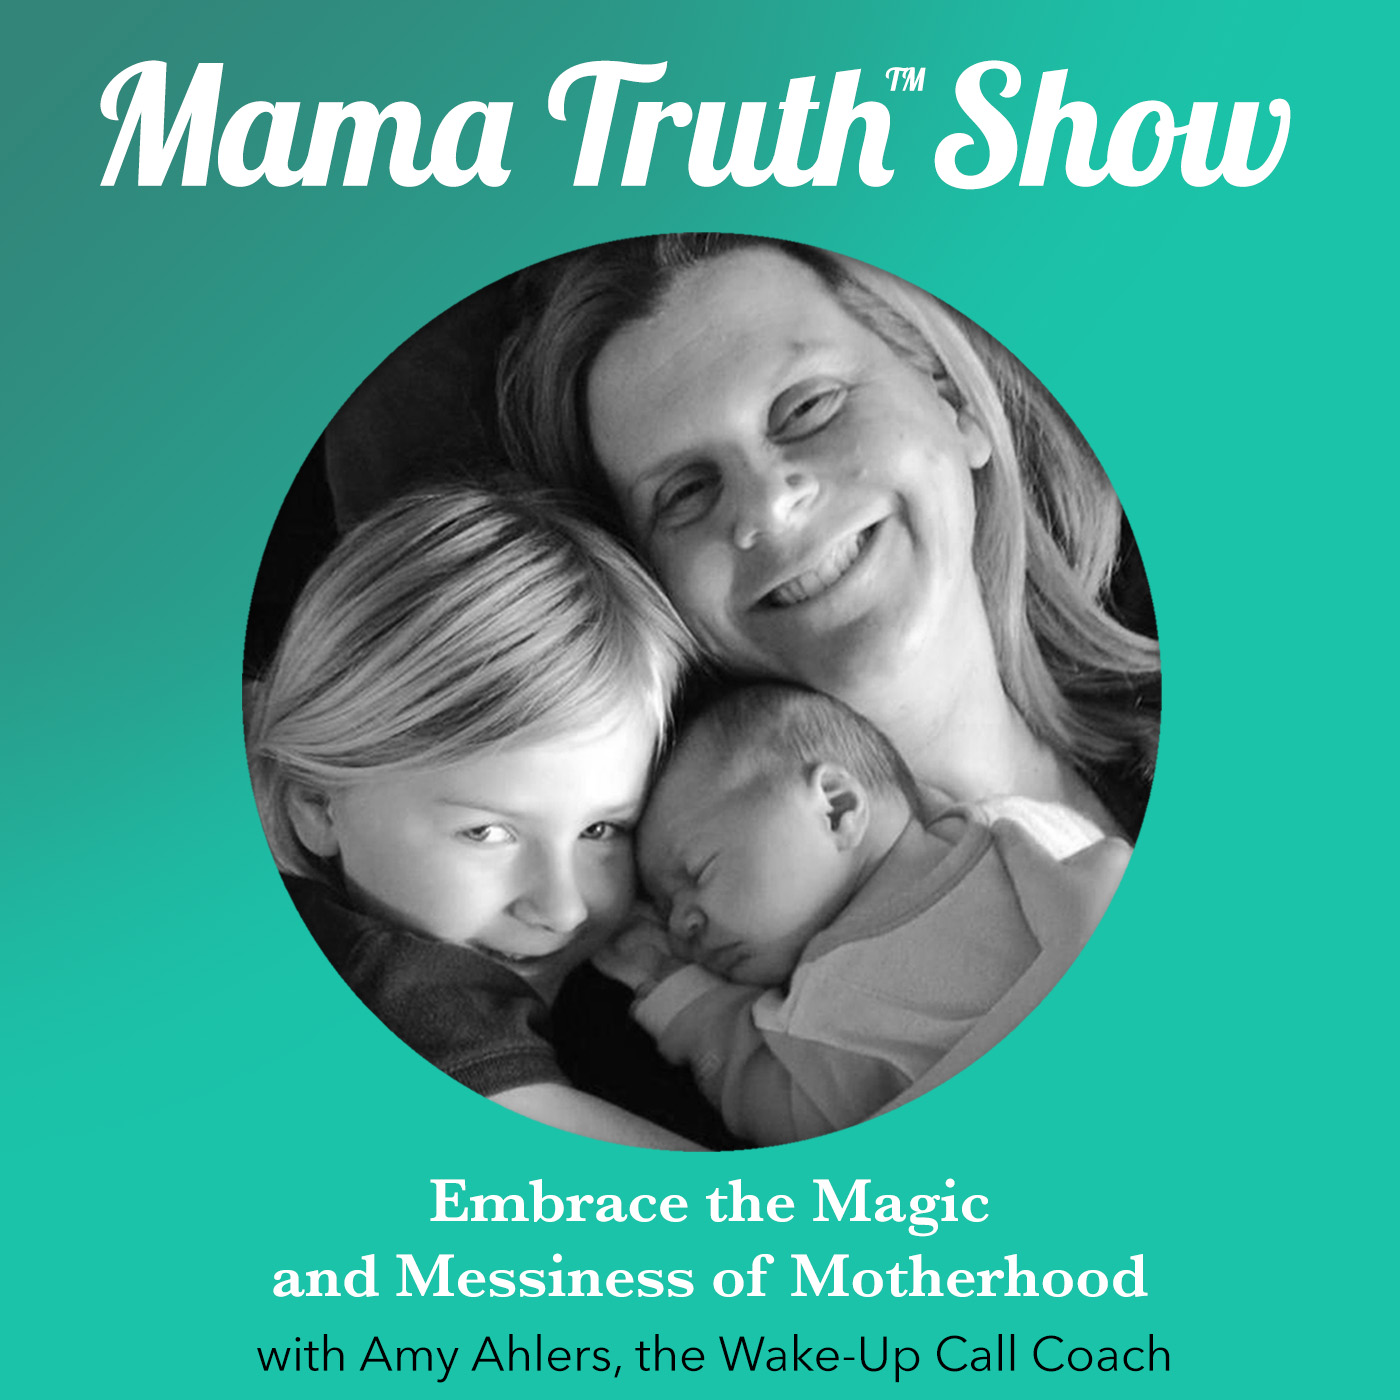 Diversity and Difficult Conversations (Race Relations Mama Truth Show Series with Desiree Adaway) 